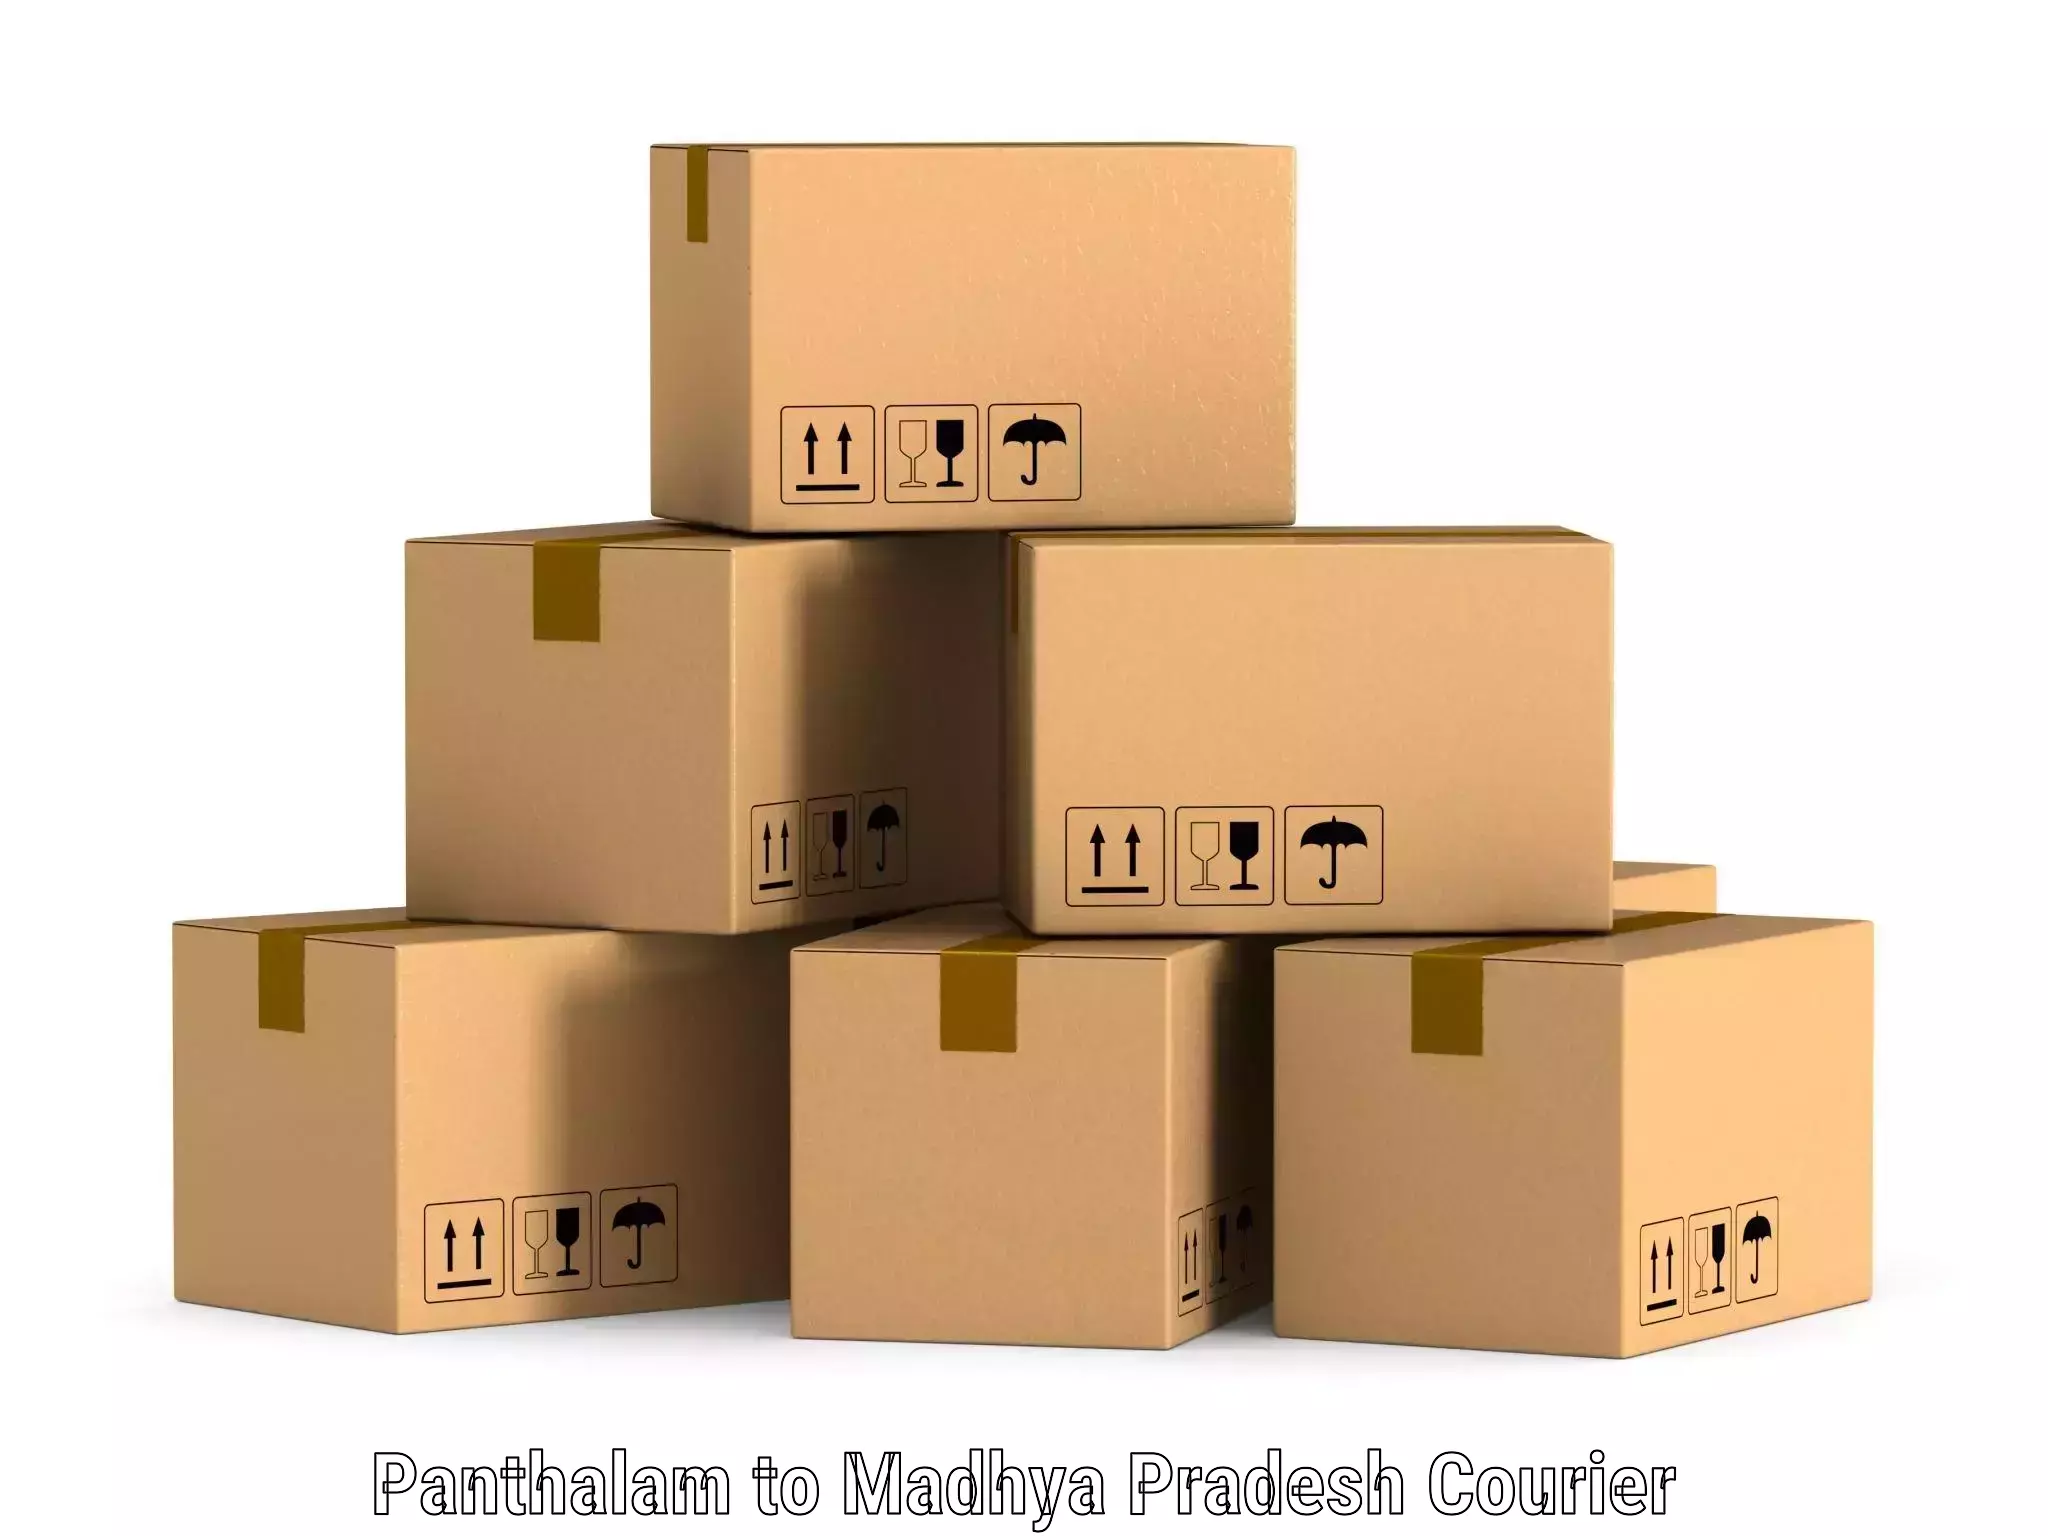 Customized shipping options Panthalam to IIT Indore